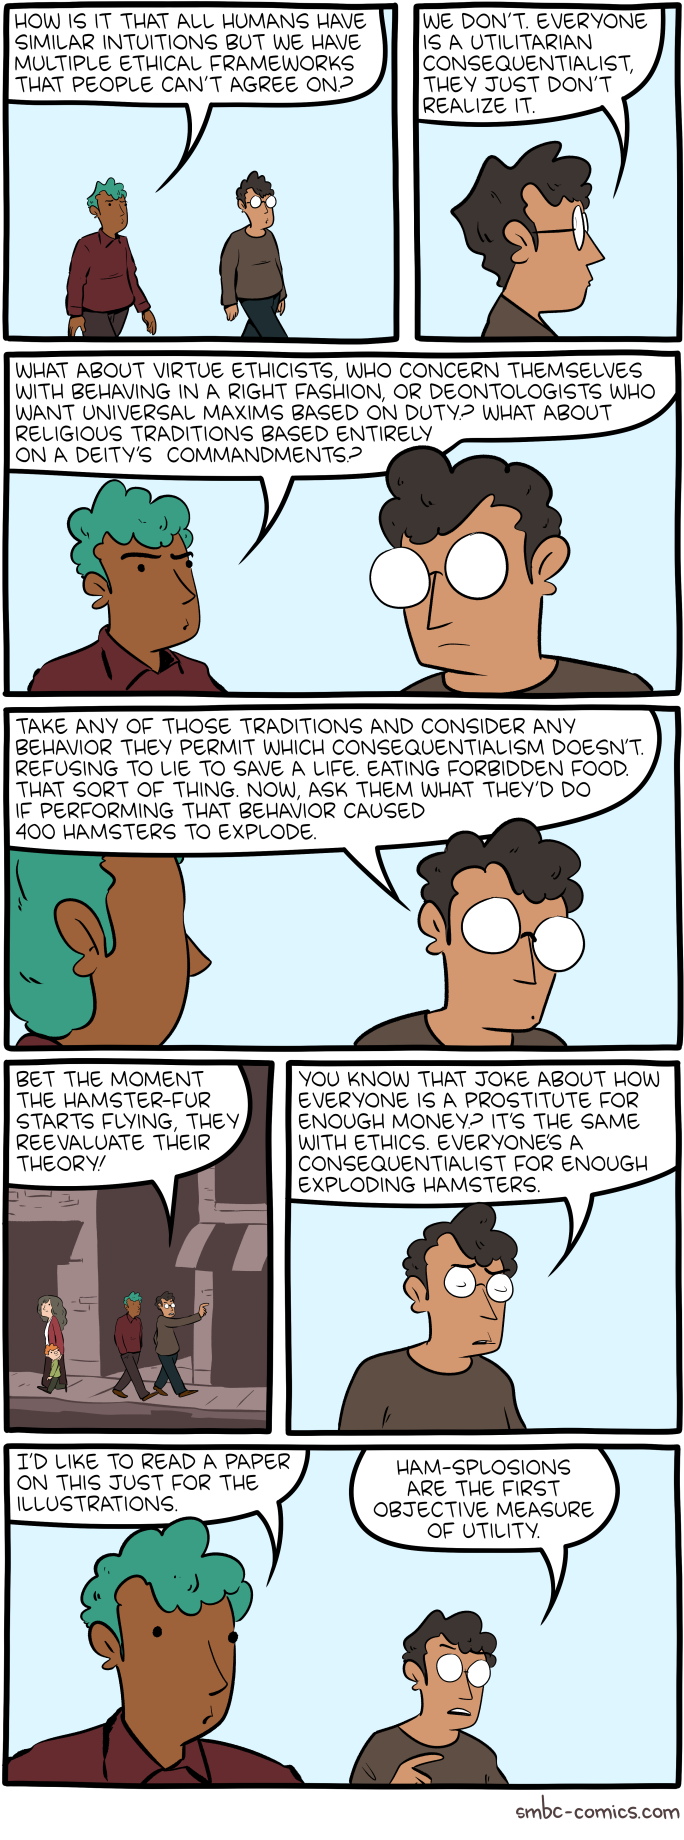 How did it become ethics month at SMBC?